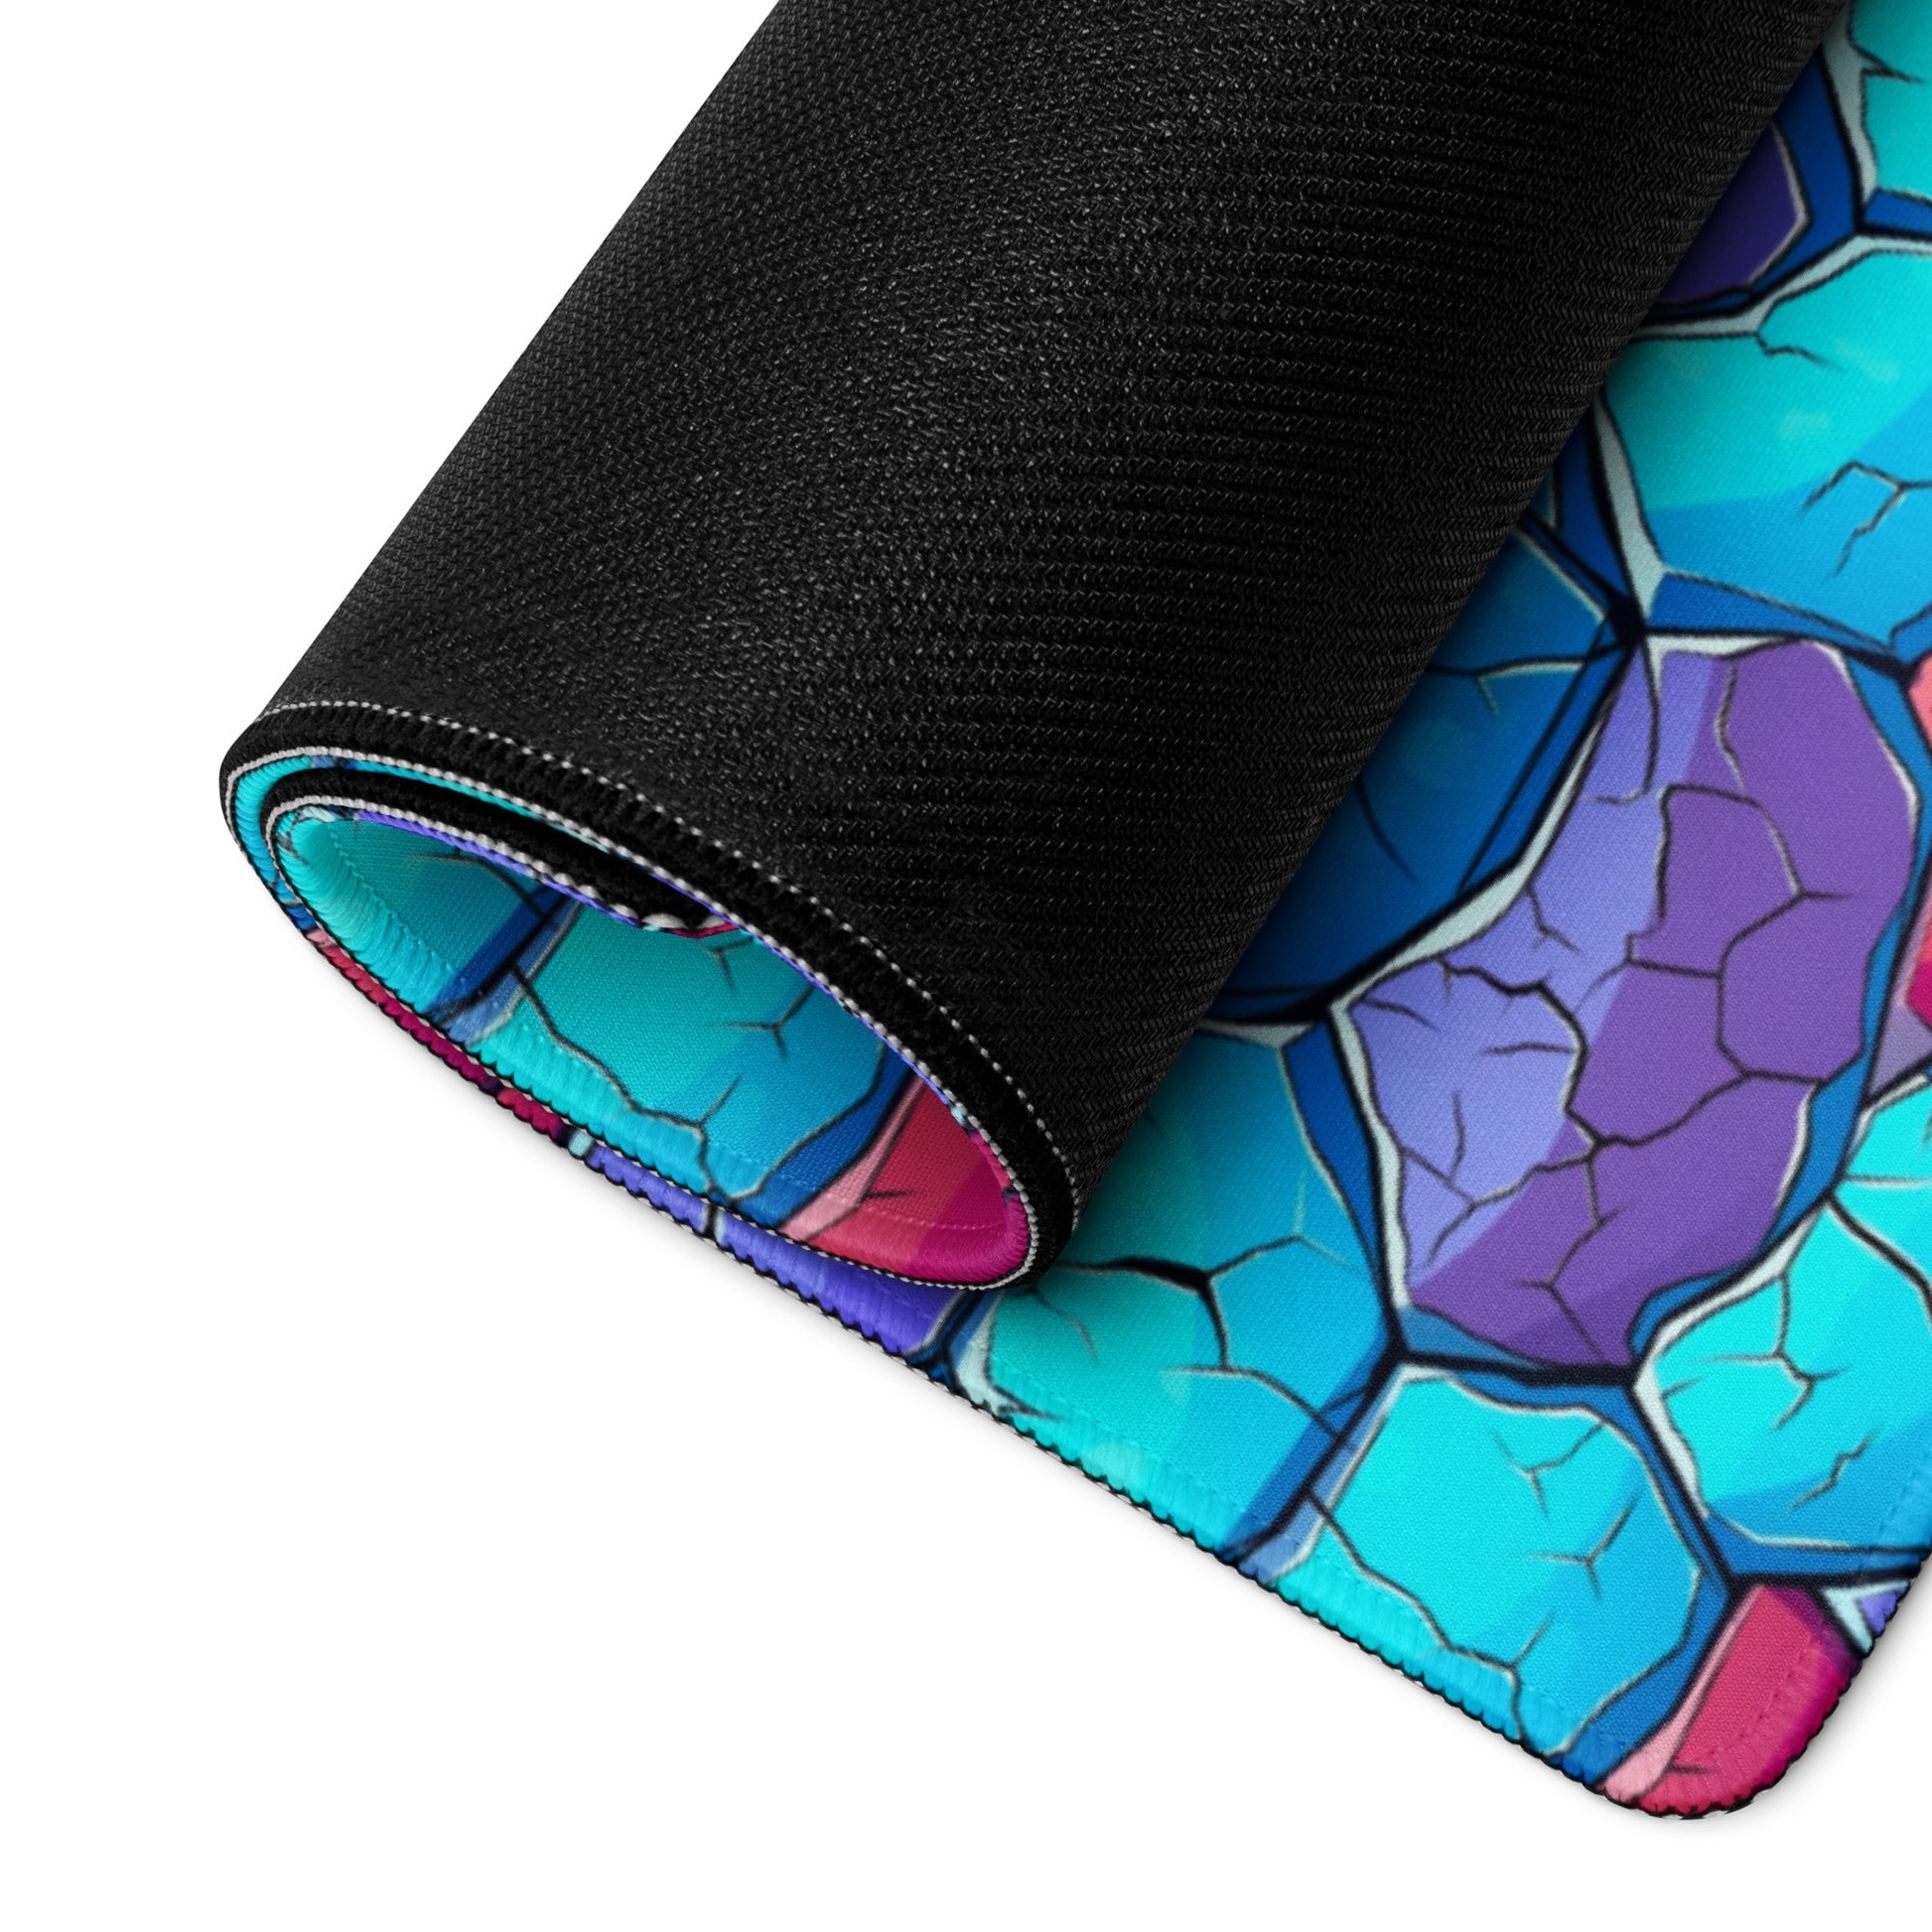 A blue and red crystal gaming desk pad rolled up.